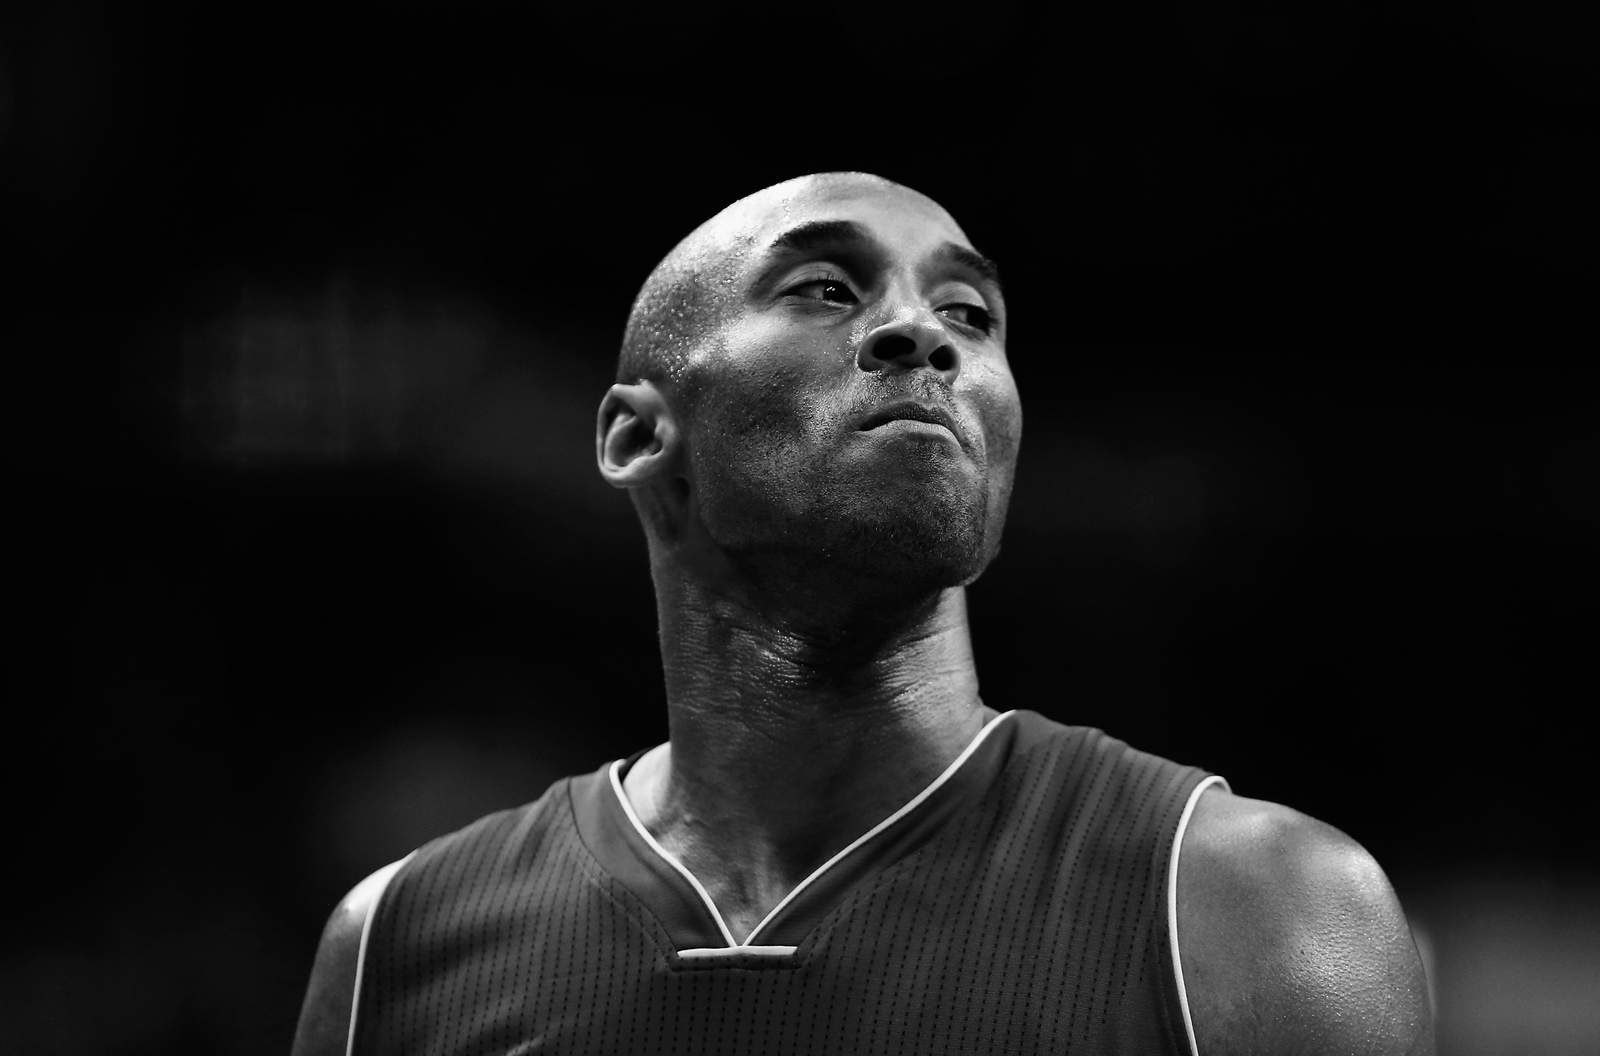 Kobe Bryant, No. 24 on the Los Angeles Lakers, looks on against the Washington Wizards in the first half of a game at Verizon Center on Dec. 2, 2015.